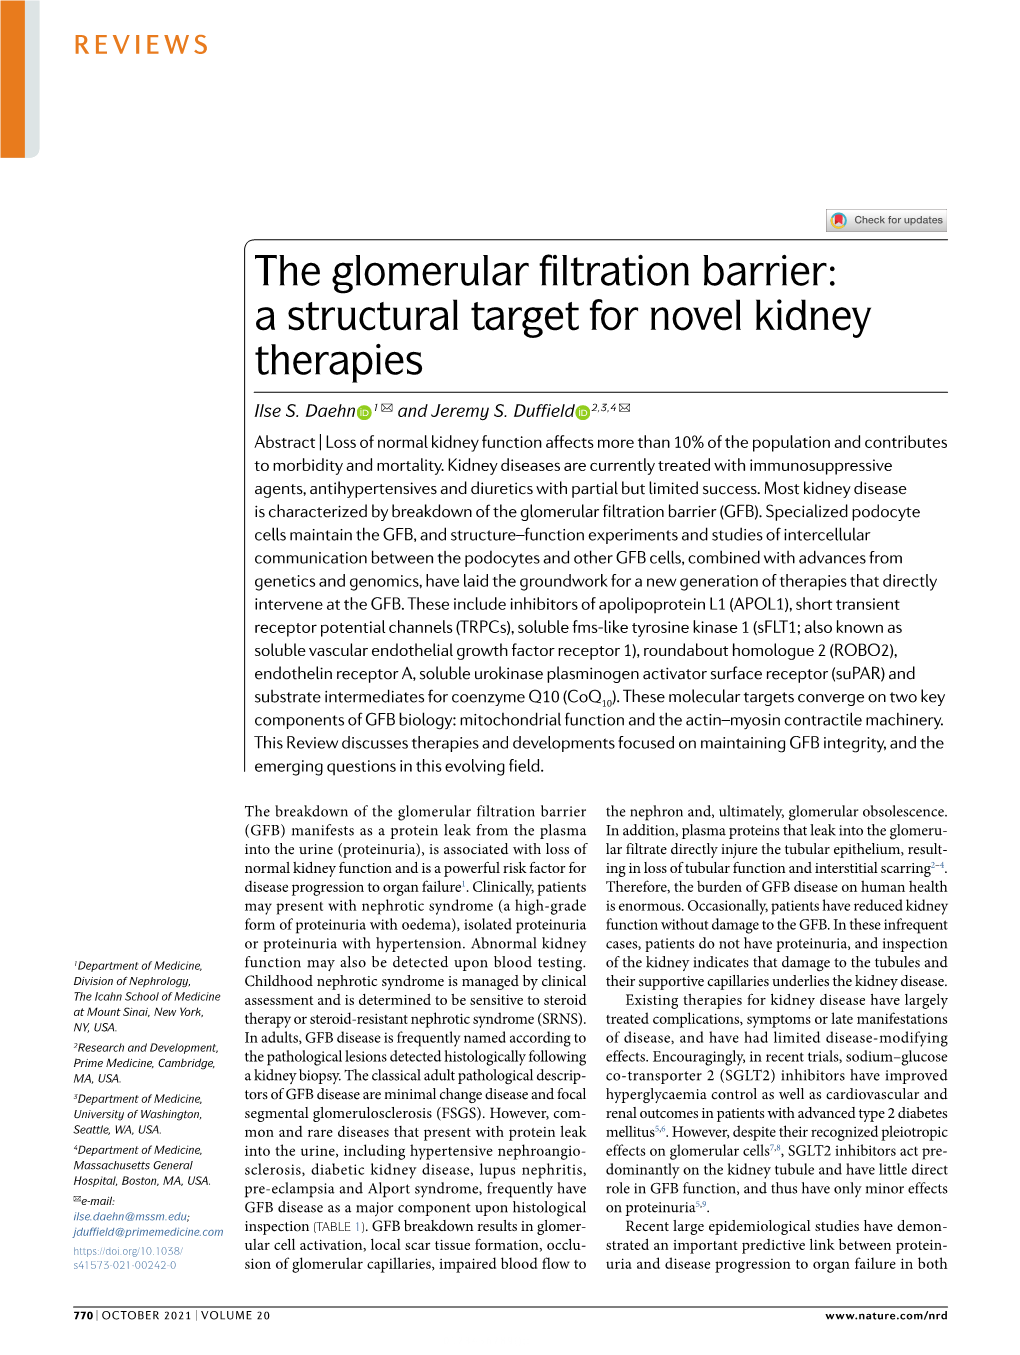 The Glomerular Filtration Barrier: a Structural Target for Novel Kidney Therapies